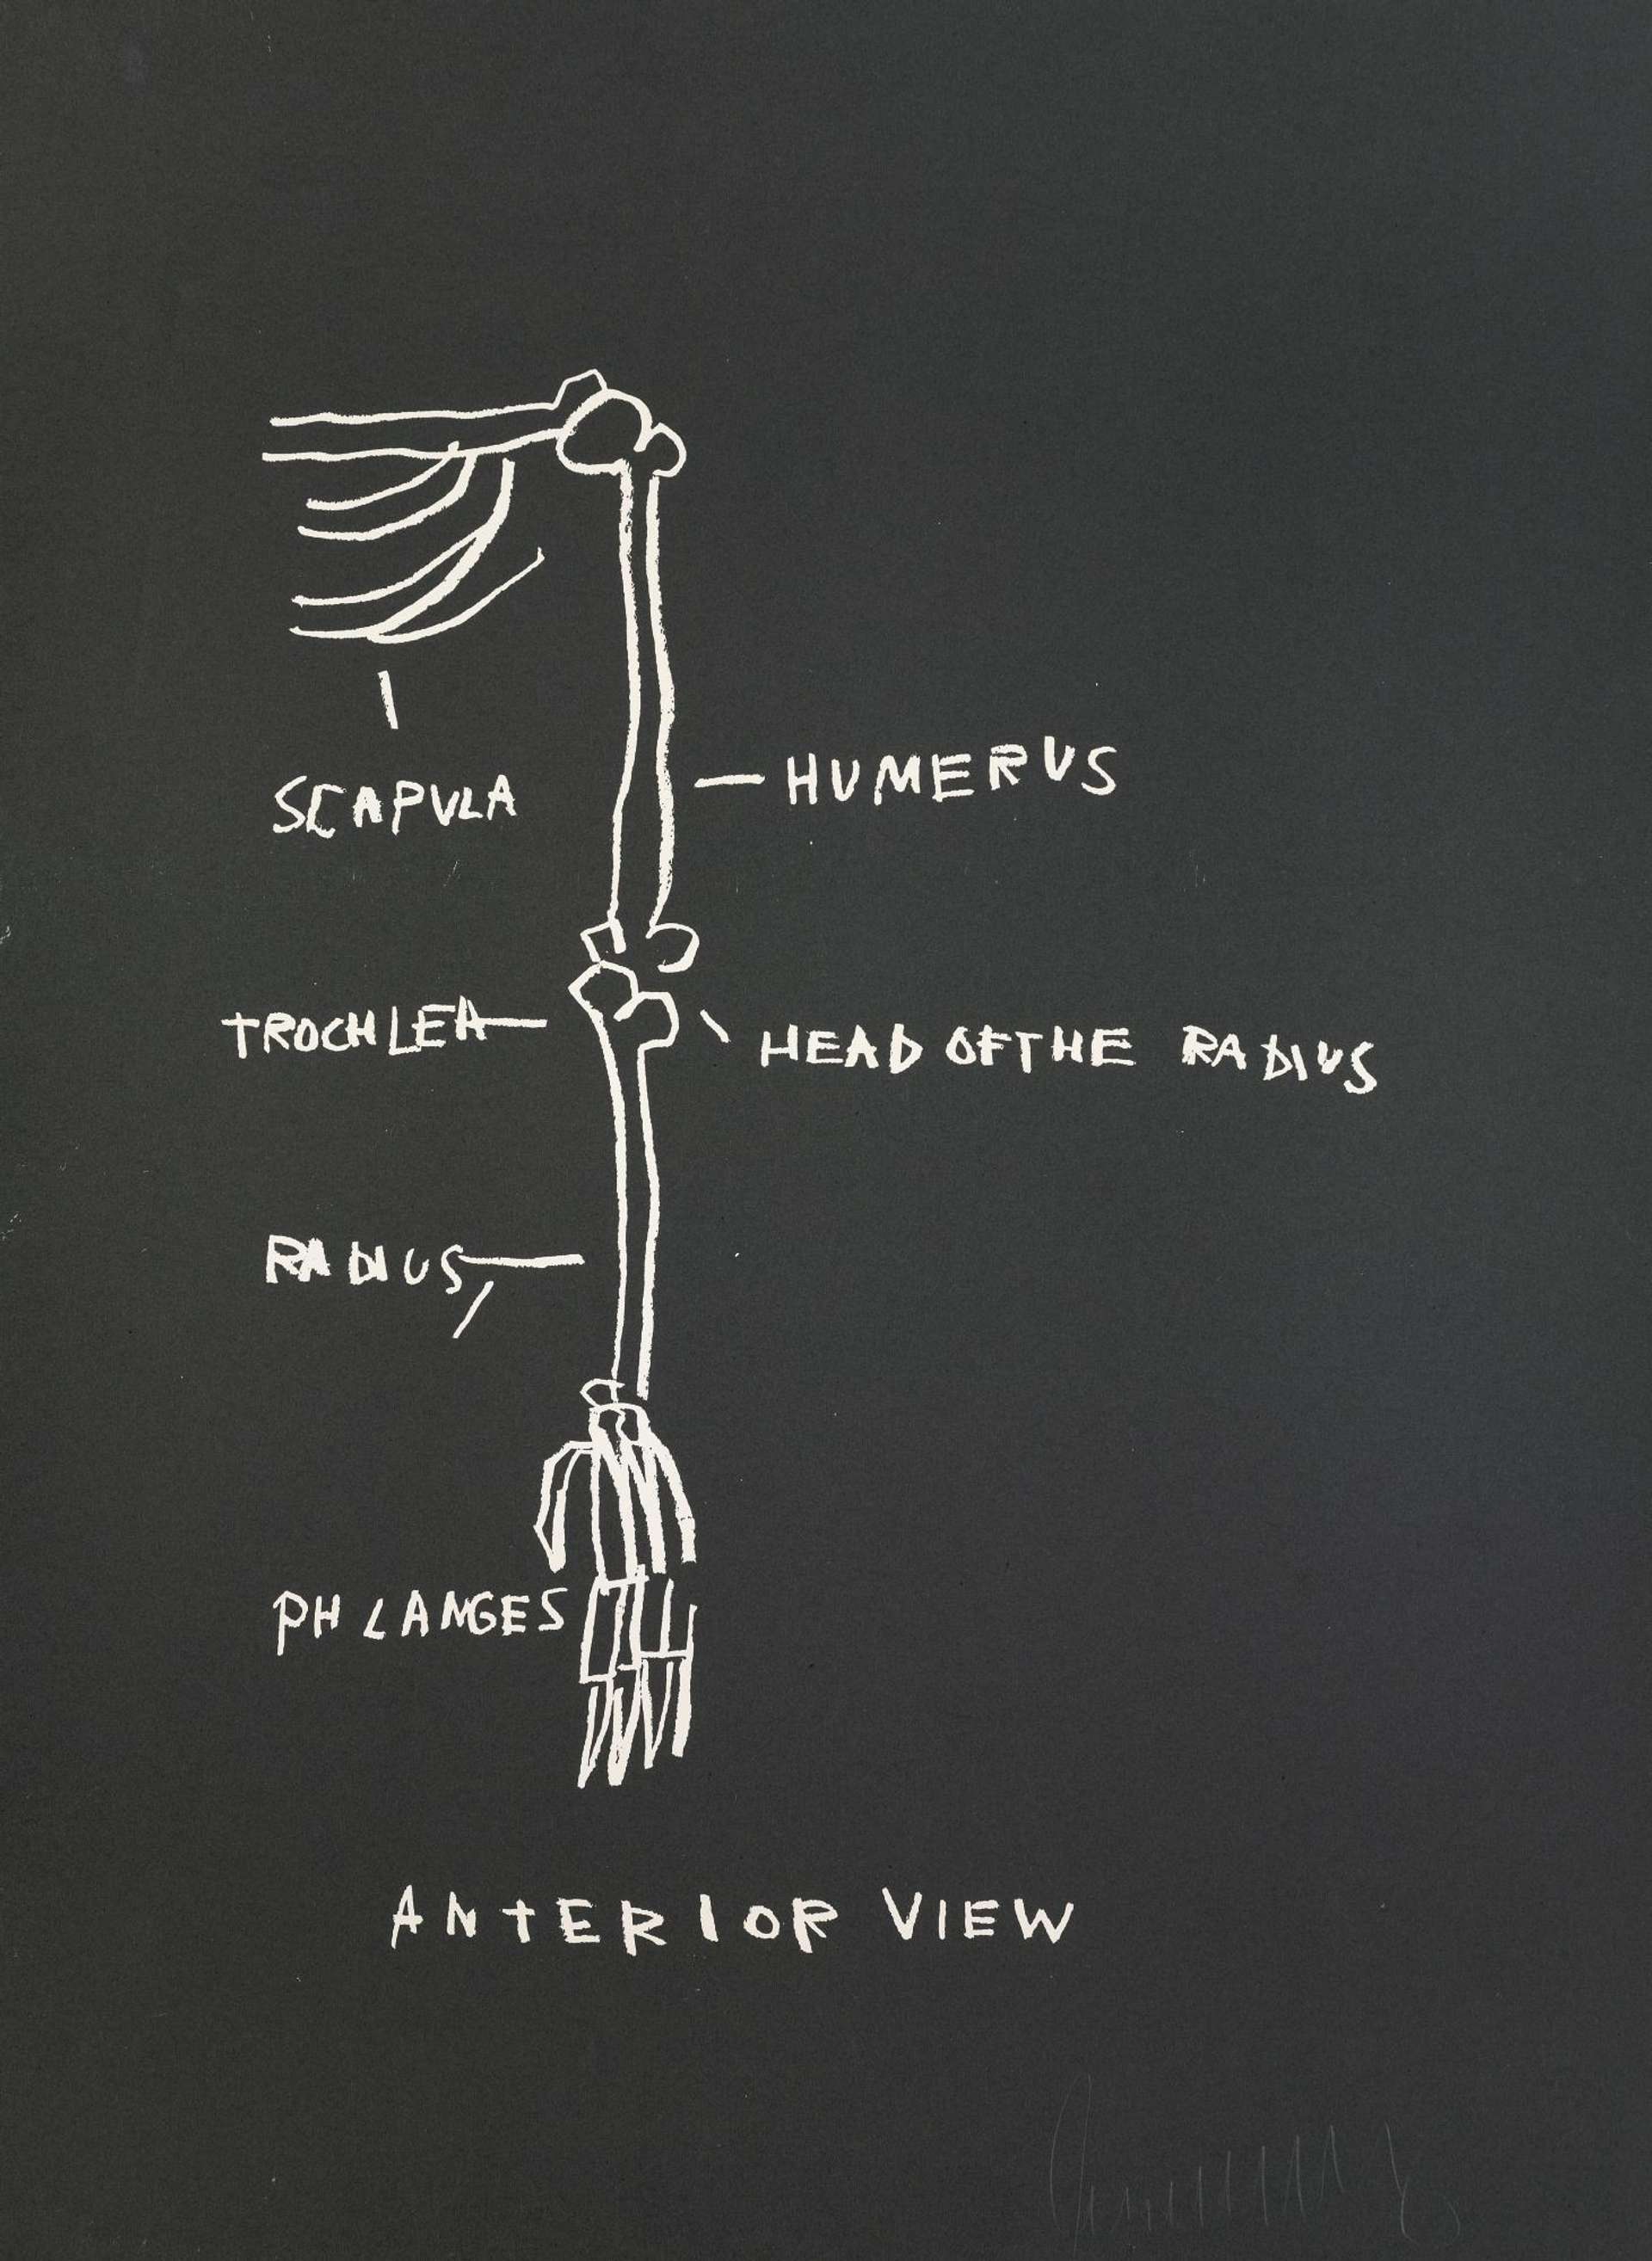 An image of the artwork Anatomy, Anterior View by Basquiat. It shows a drawing of a right arm’s bones, white against a black background, with specific sections such as “phlanges” (sic), “scapula” and “humerus” labelled.